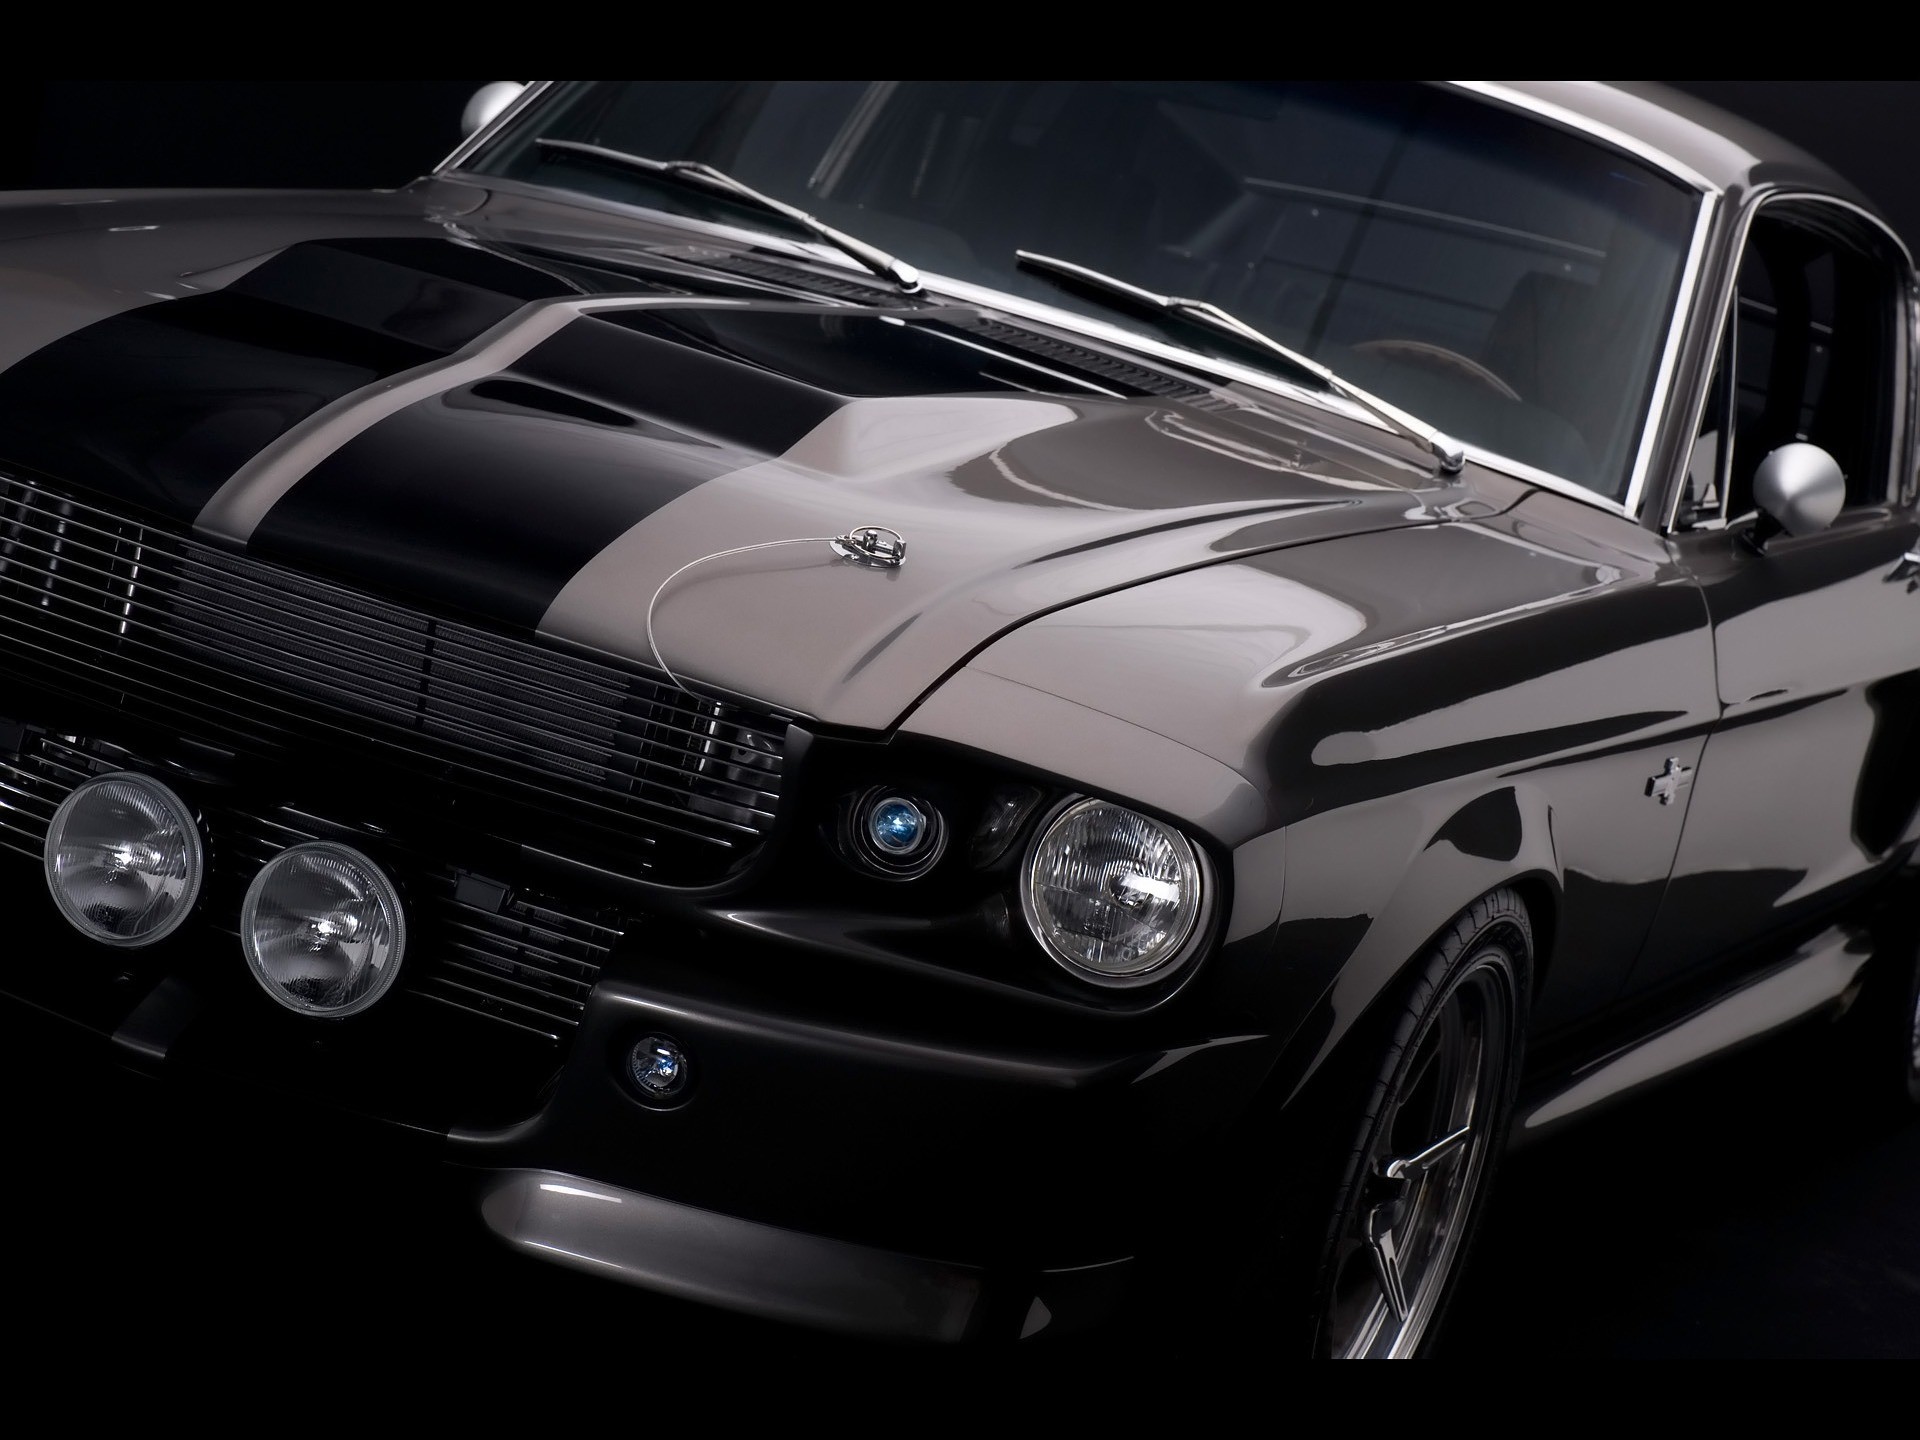 1920x1440 1976 Ford Mustang Wallpaper Muscle Cars Cars